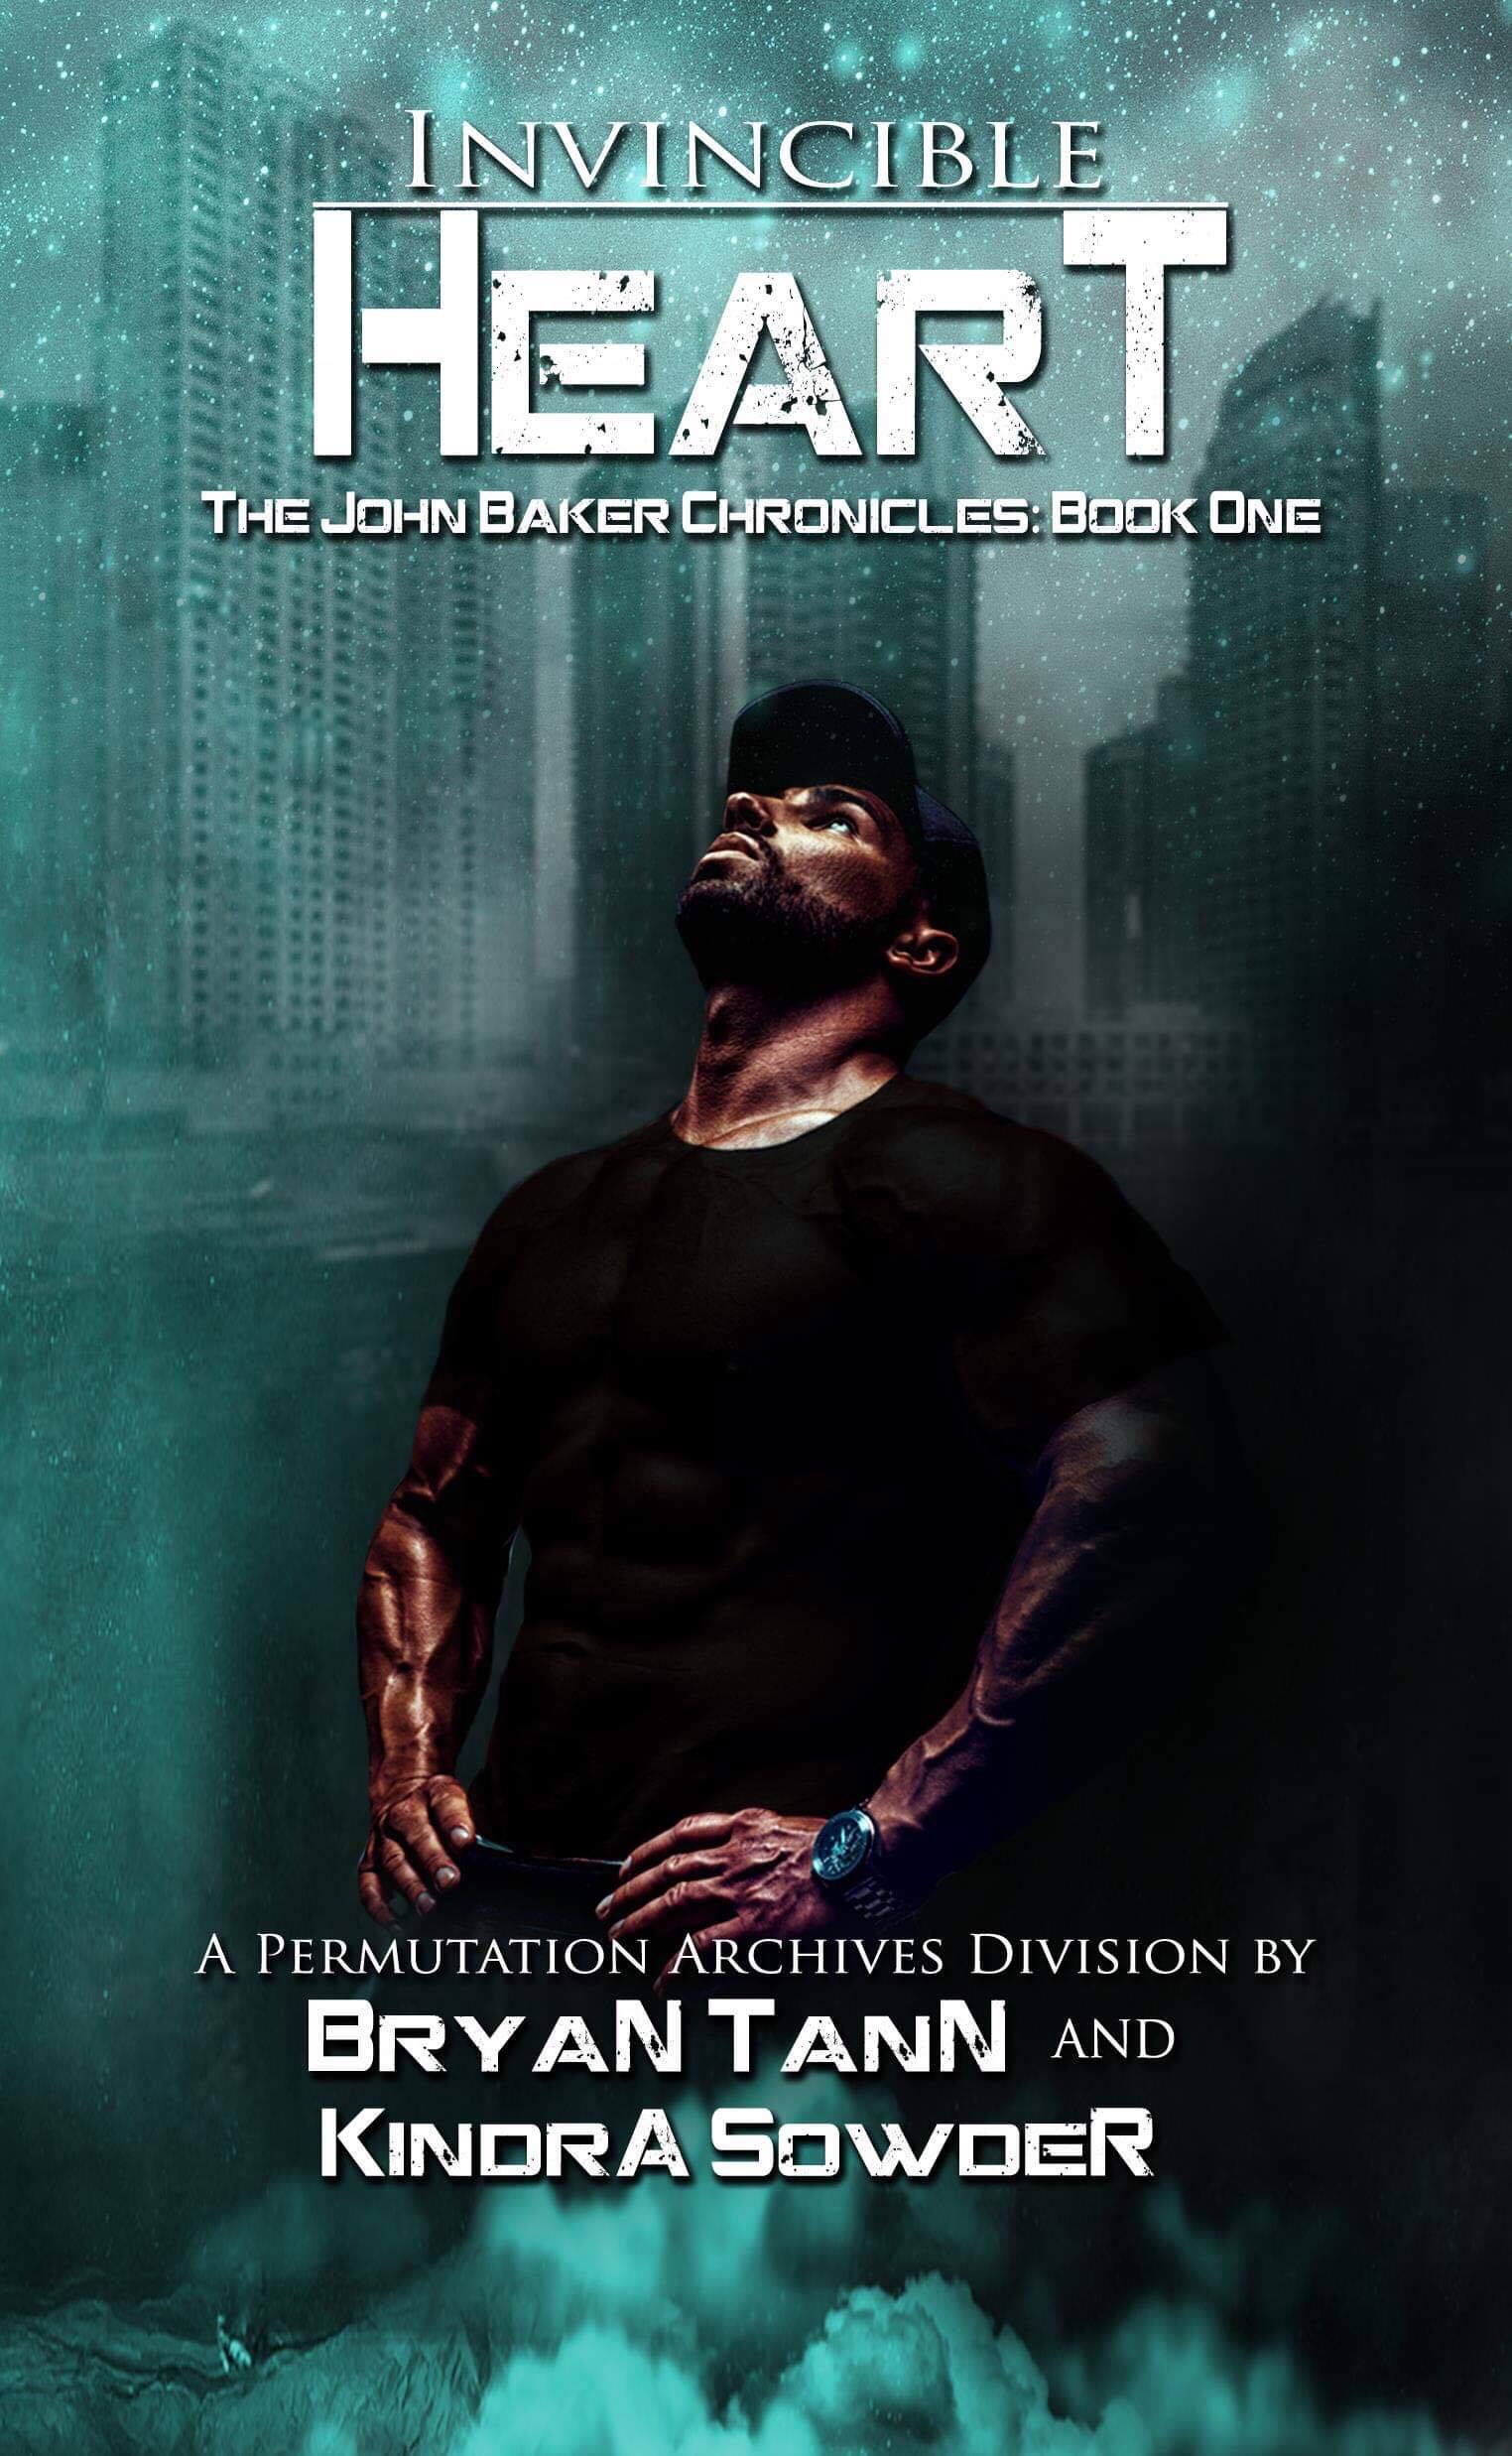 FREE: Invincible Heart (The John Baker Chronicles Book 1) (A Permutation Archives Division) by Bryan Tann & Kindra Sowder